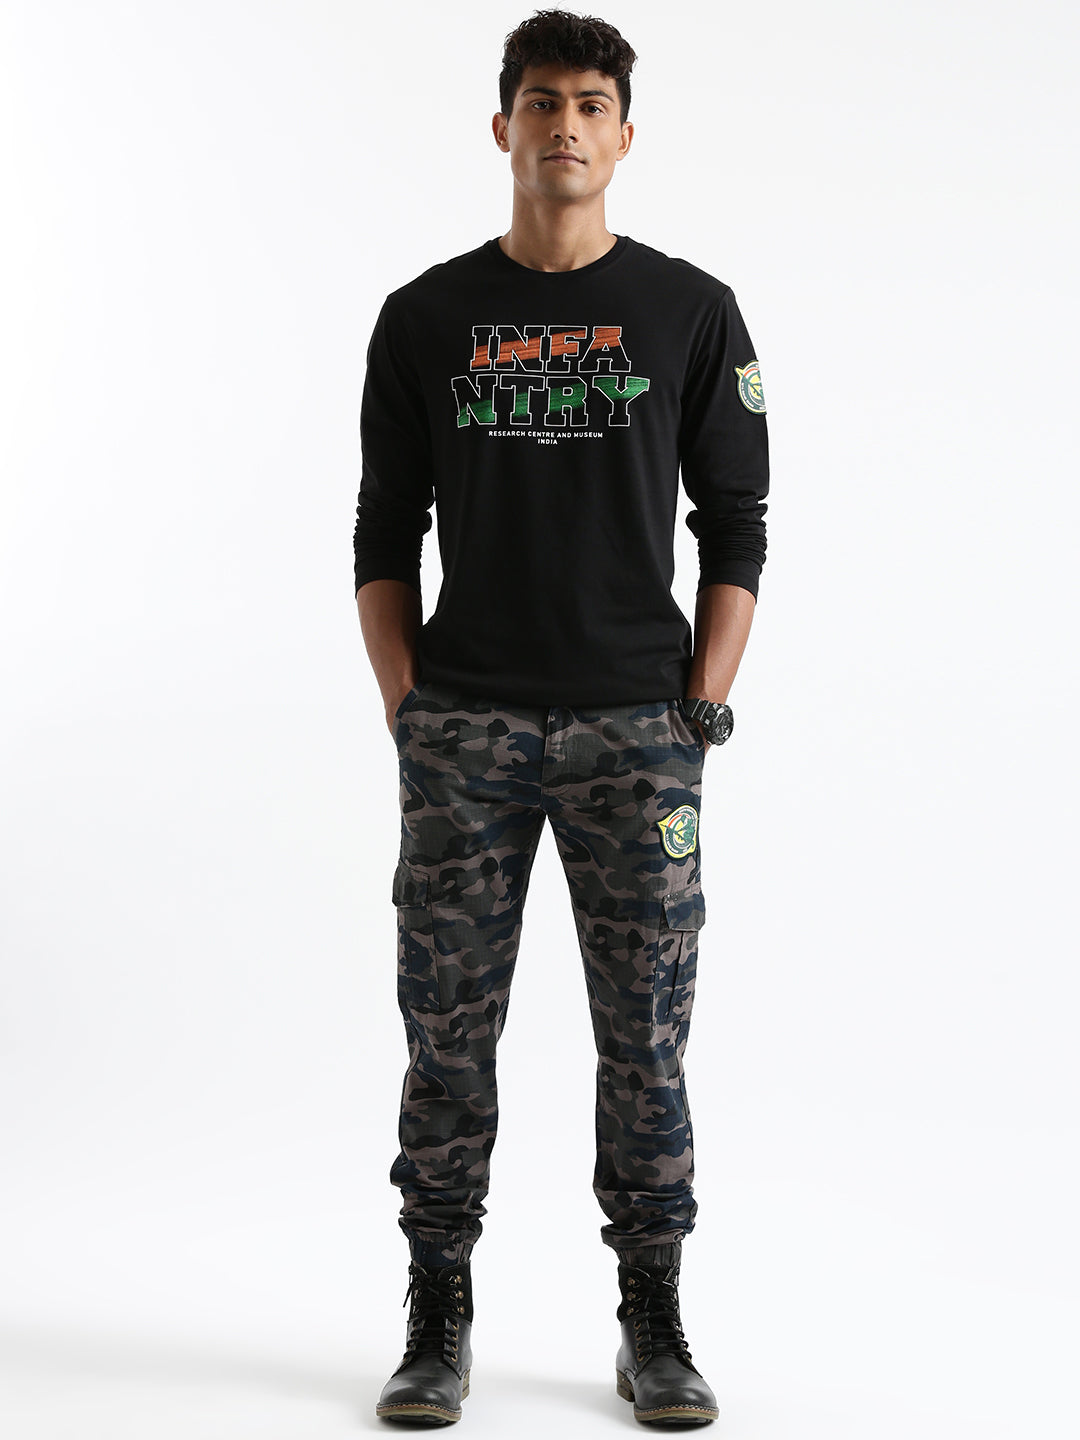 Indian Infantry By A47 Printed T-Shirt